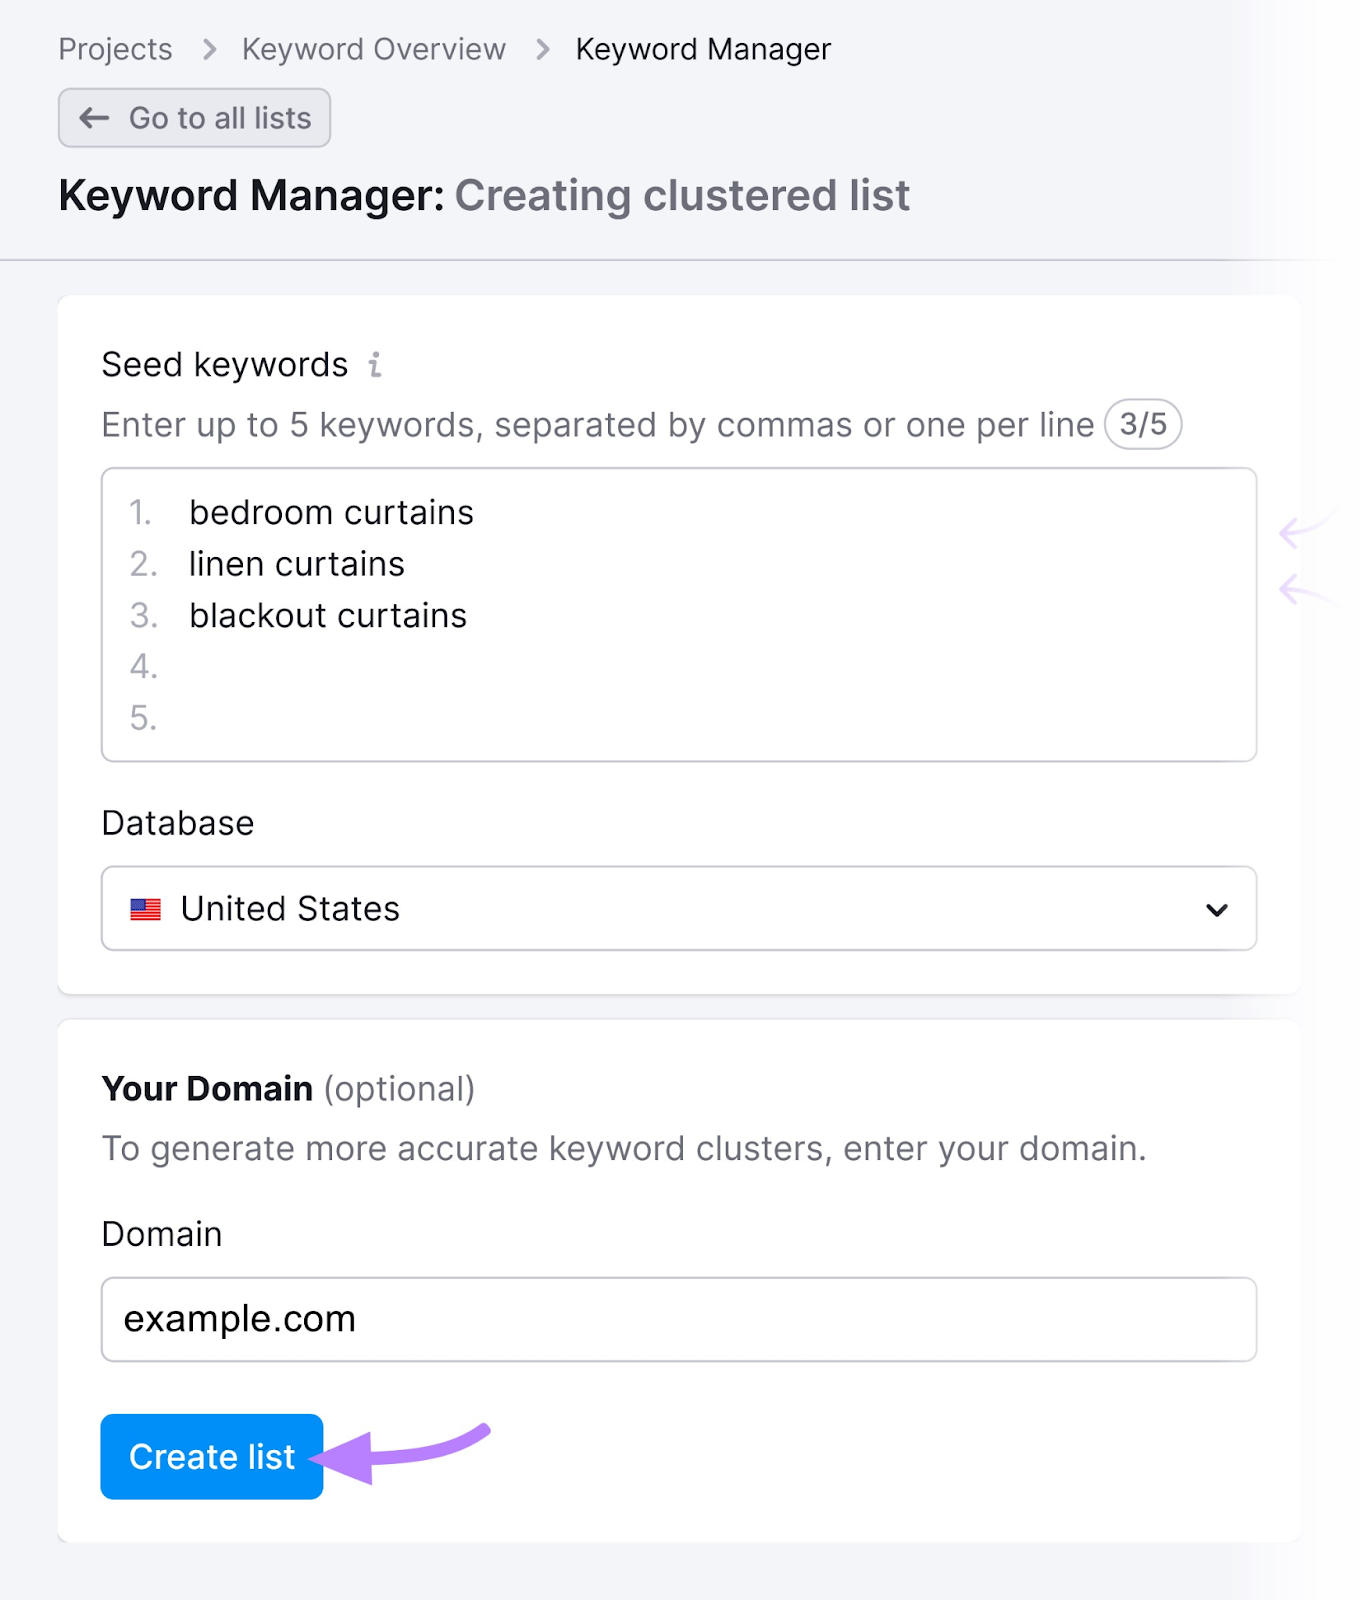 creating clustered list in Keyword Manager